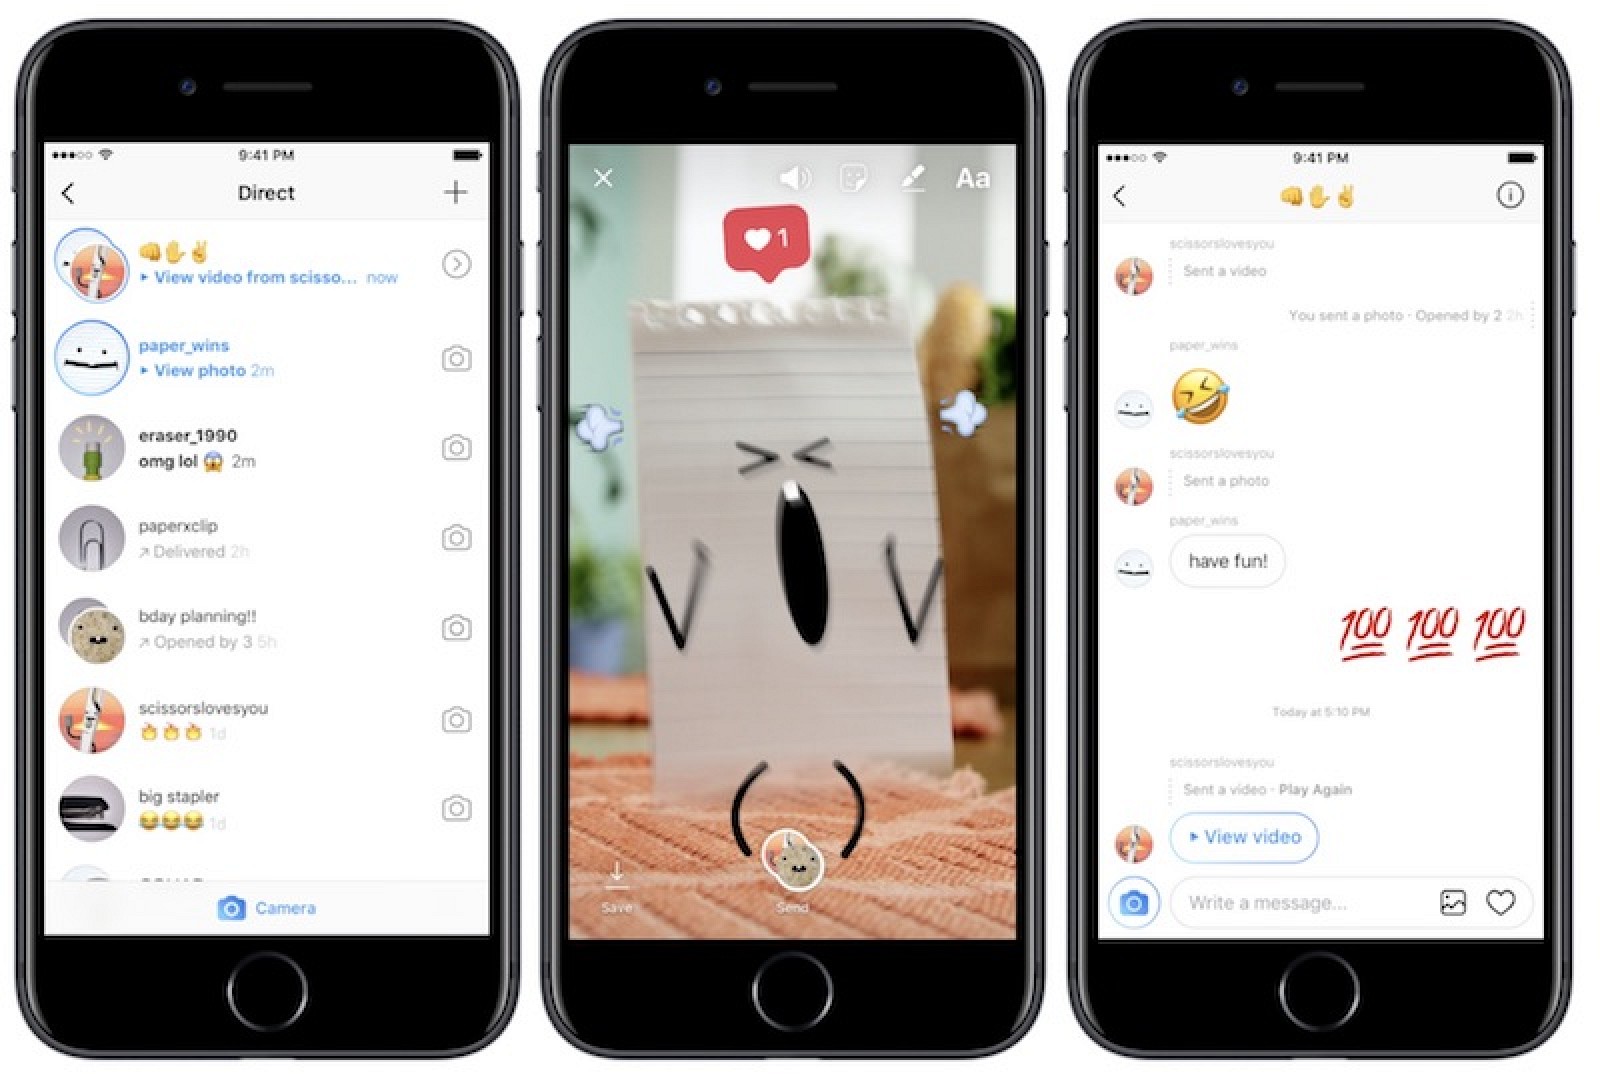 Instagram Direct is a standalone app for direct messages